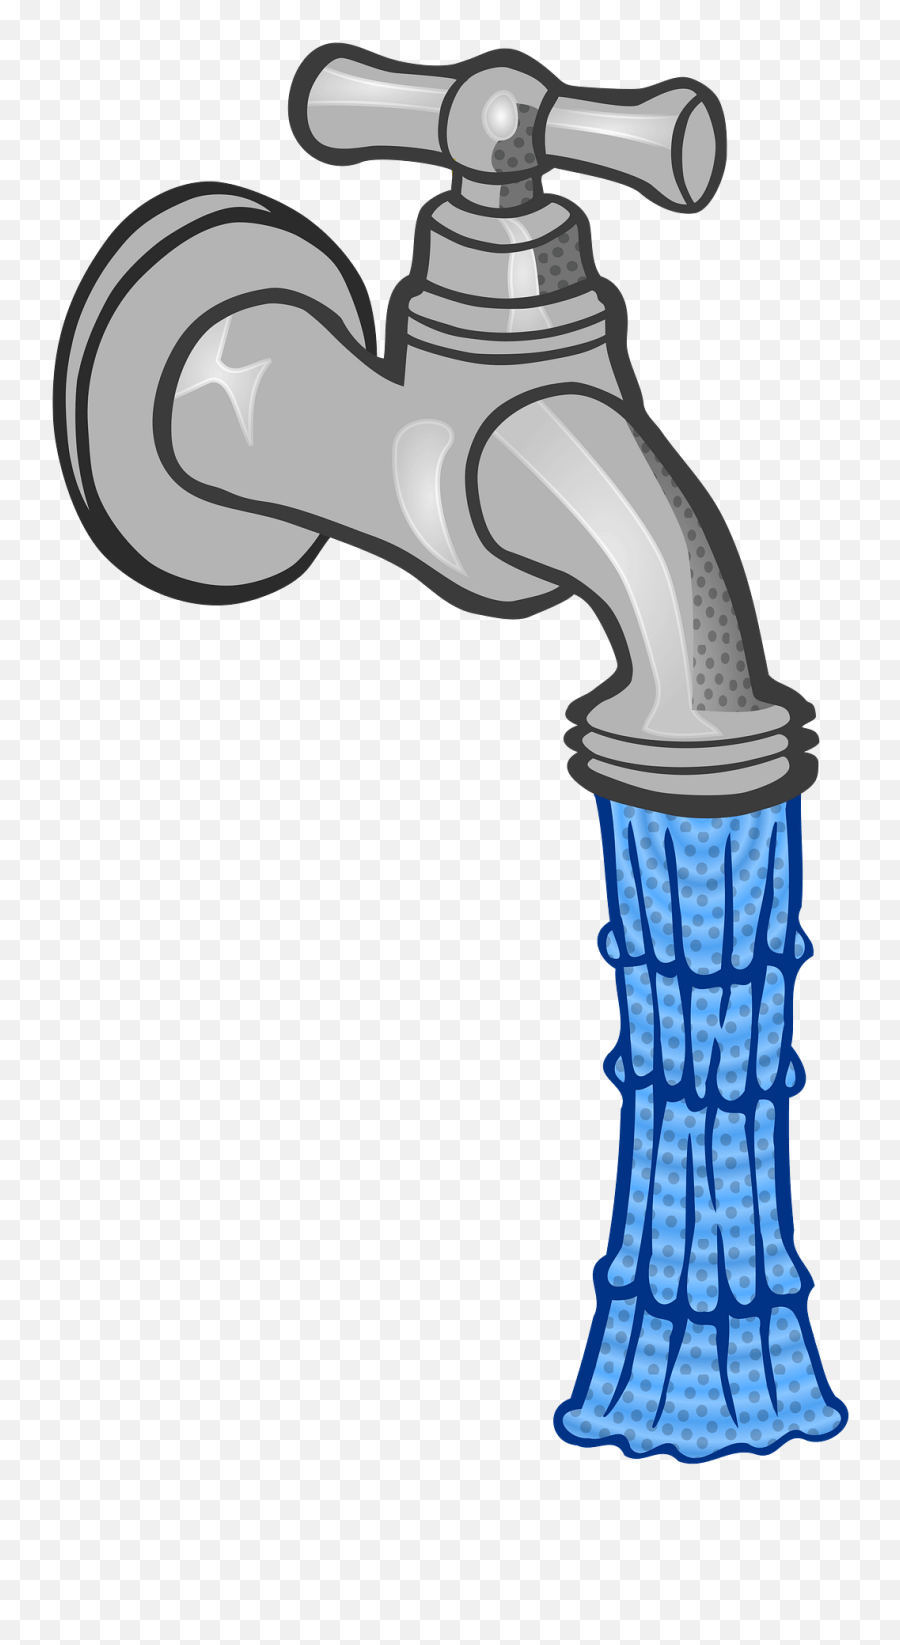 Water Coming Out Of A Faucet Clipart - Faucet Water Pipe Clipart Emoji,Hose Emoji